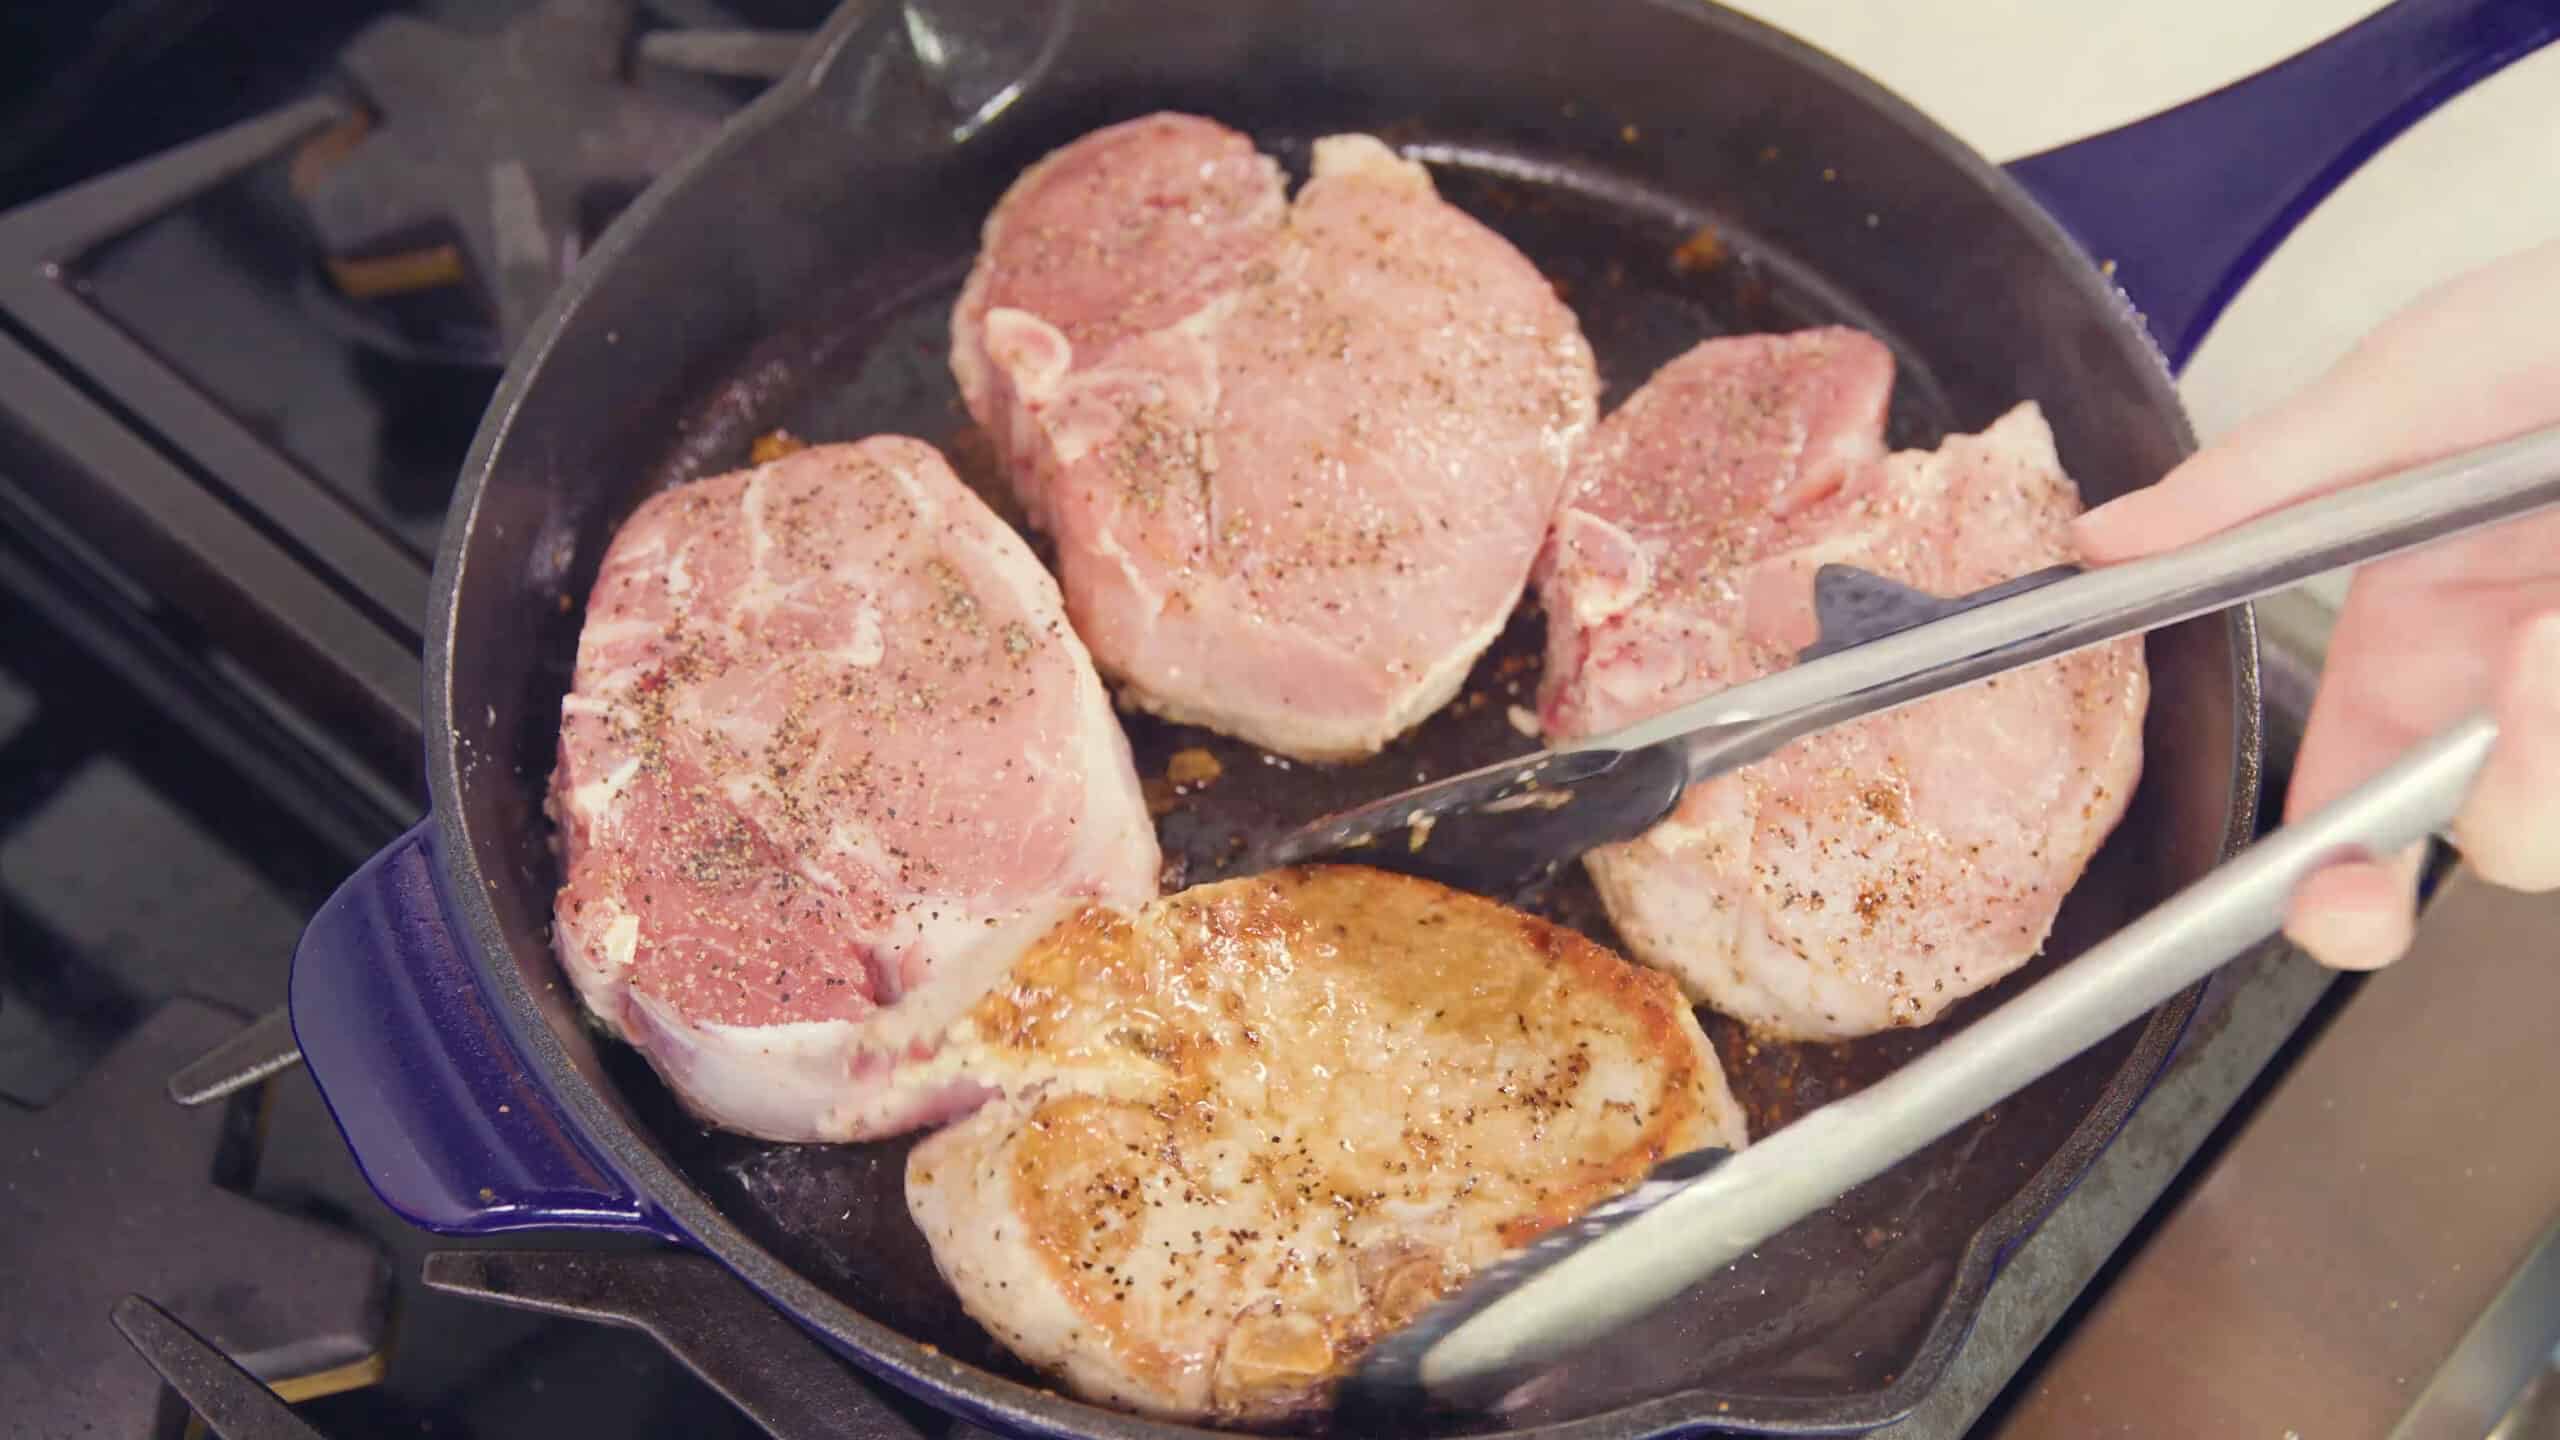 Overhead view of blue enamel cast iron skillet with four pork chops, one which has been flipped to show the seared side up.